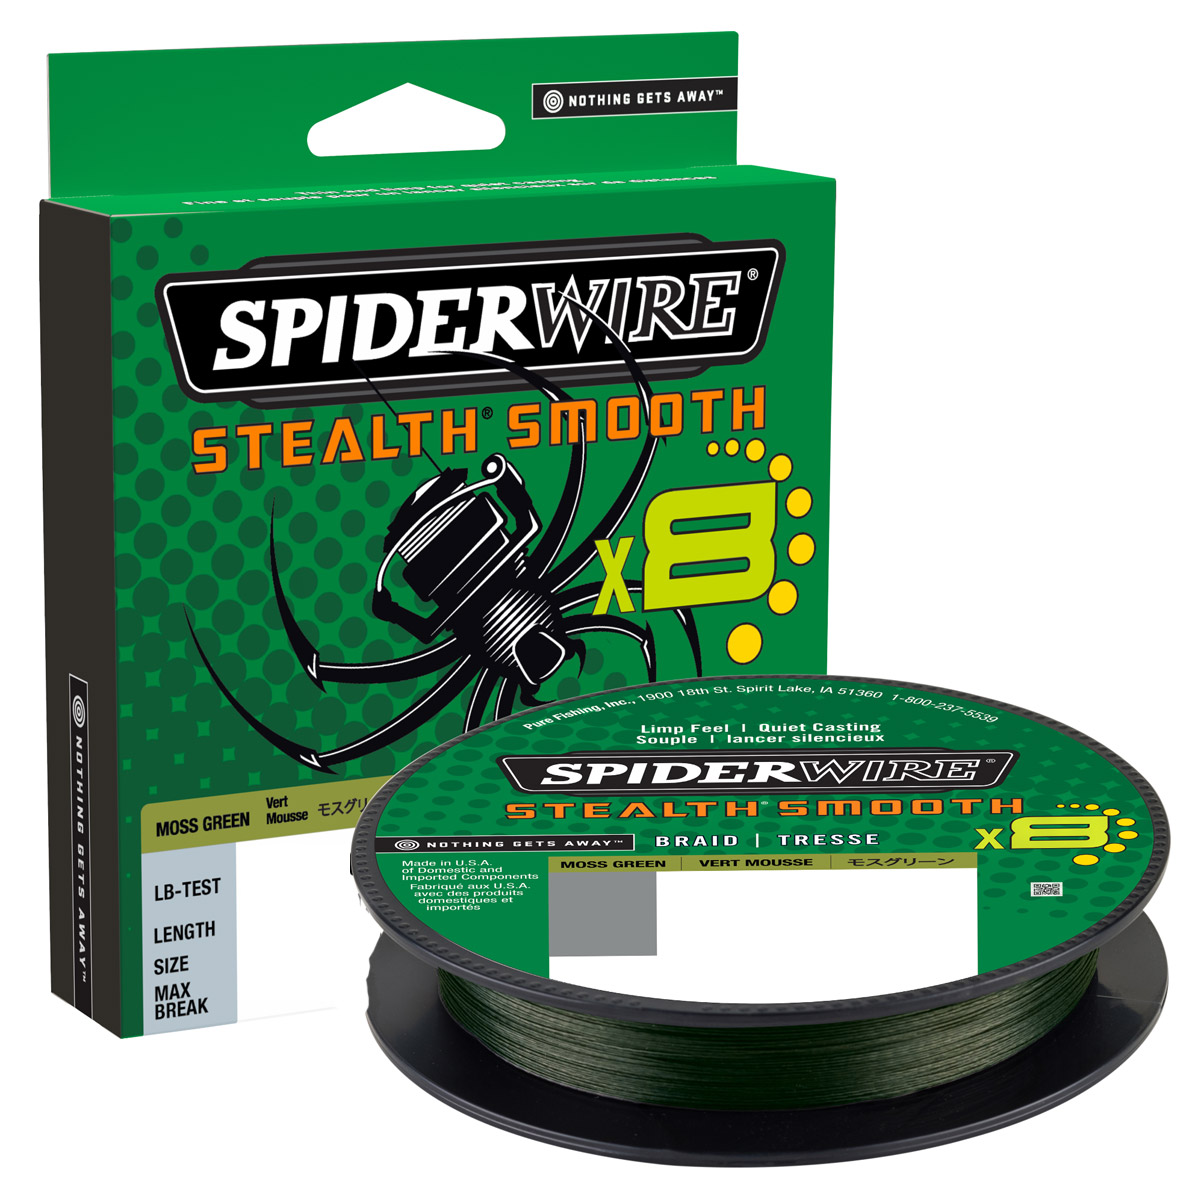 Spiderwire Stealth Smooth 8 Moss Green 300 M -  0.15 mm -  0.09 mm -  0.19 mm -  0.29 mm -  0.23 mm -  0.11 mm -  0.33 mm -  0.13 mm -  0.08 mm -  0,06 mm